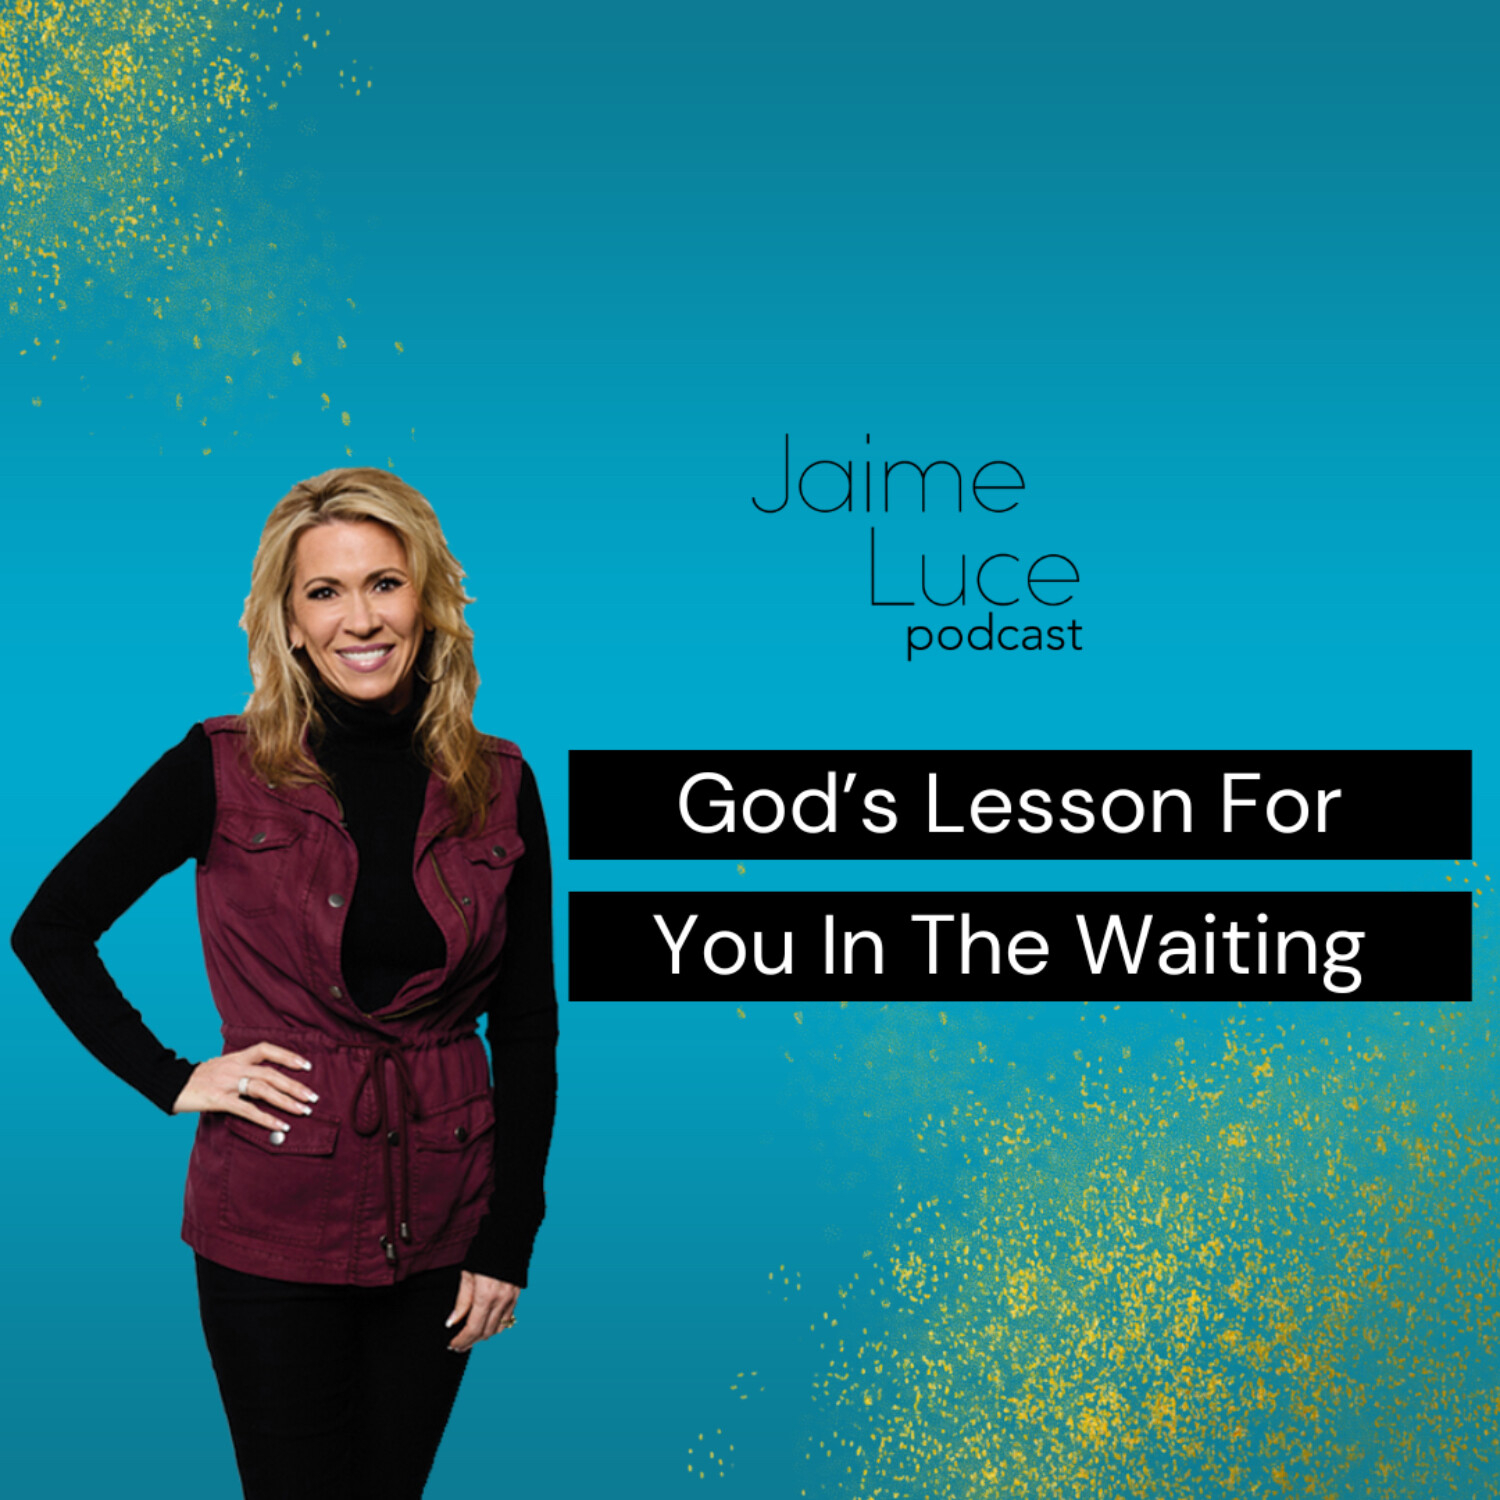 God’s Lesson For You In The Waiting